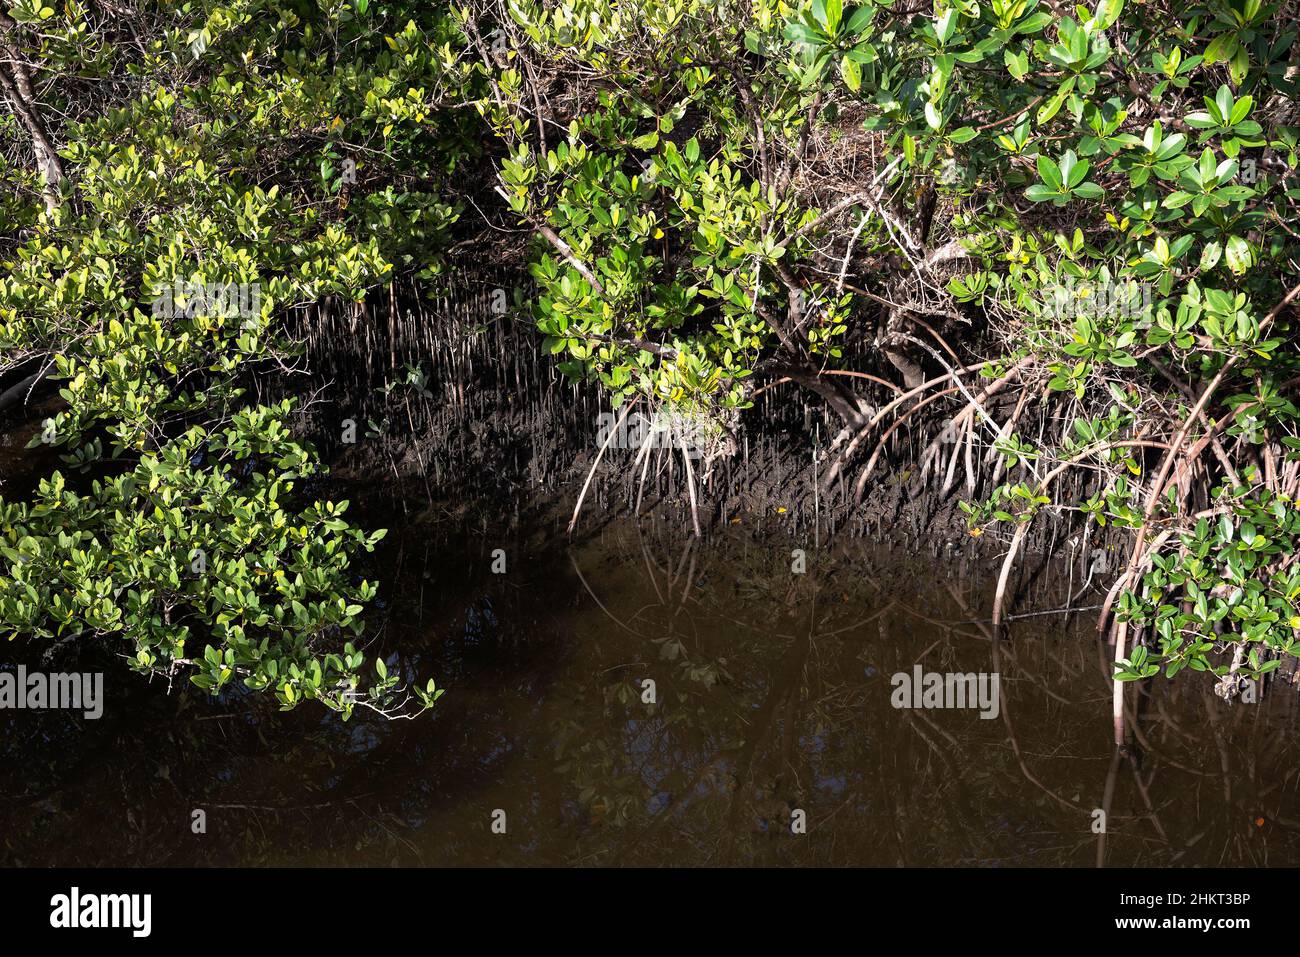 Detail of red mangrove air roots, and black mangrove roots exposed during low tide in a Florida mangrove swamp. Stock Photo